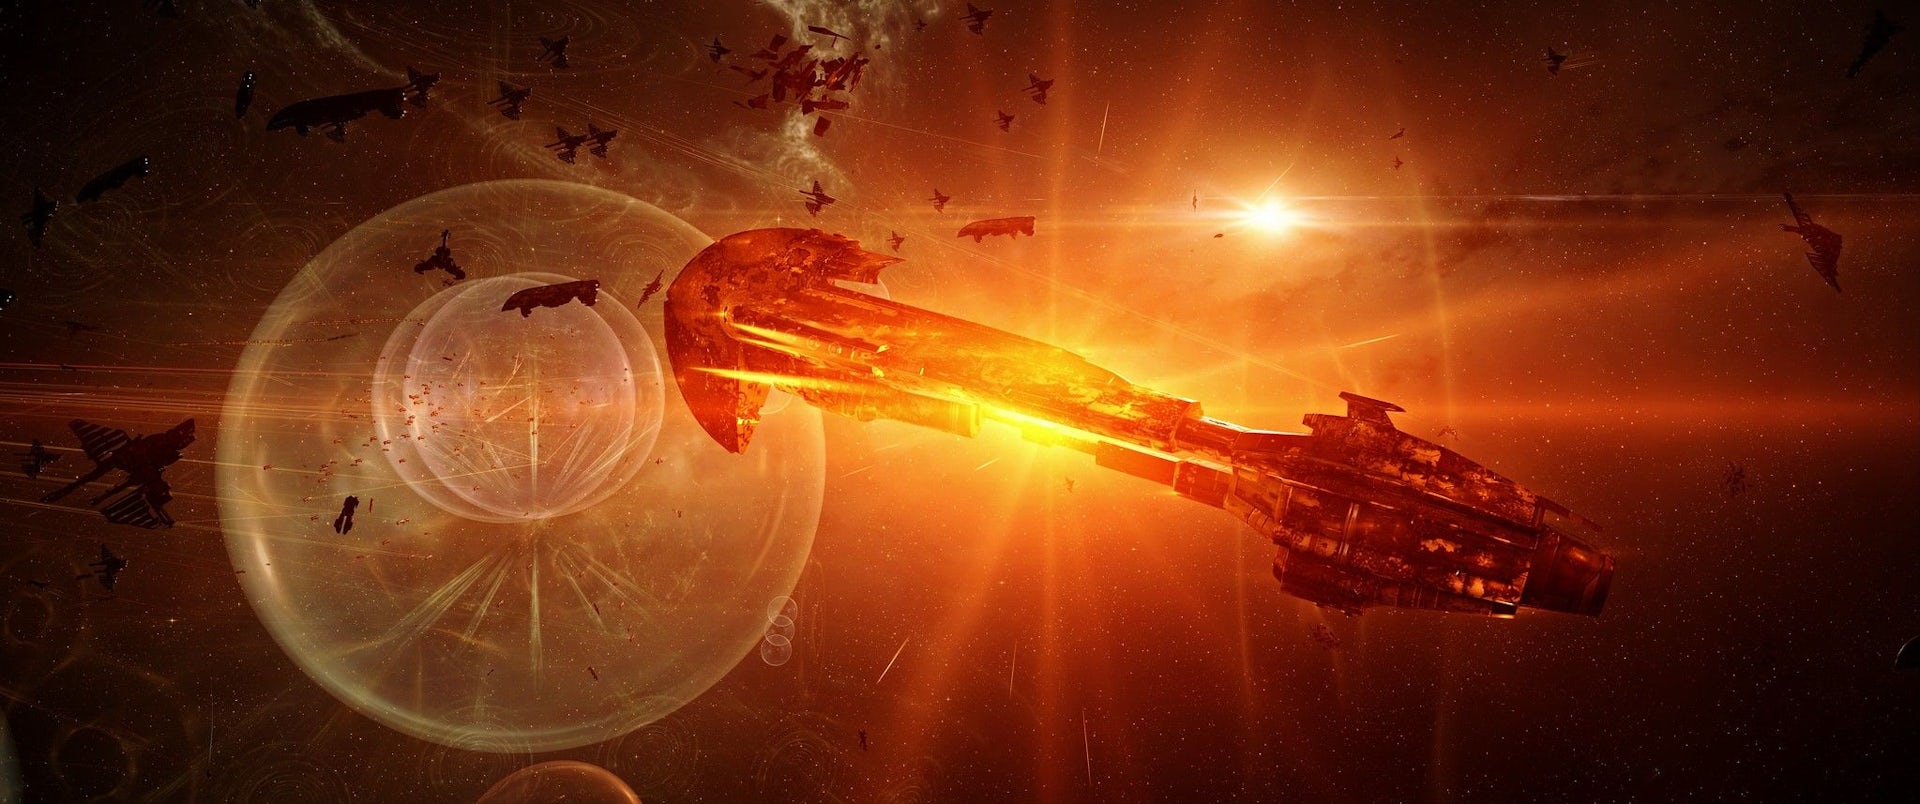 Your mind-boggling EVE Online facts